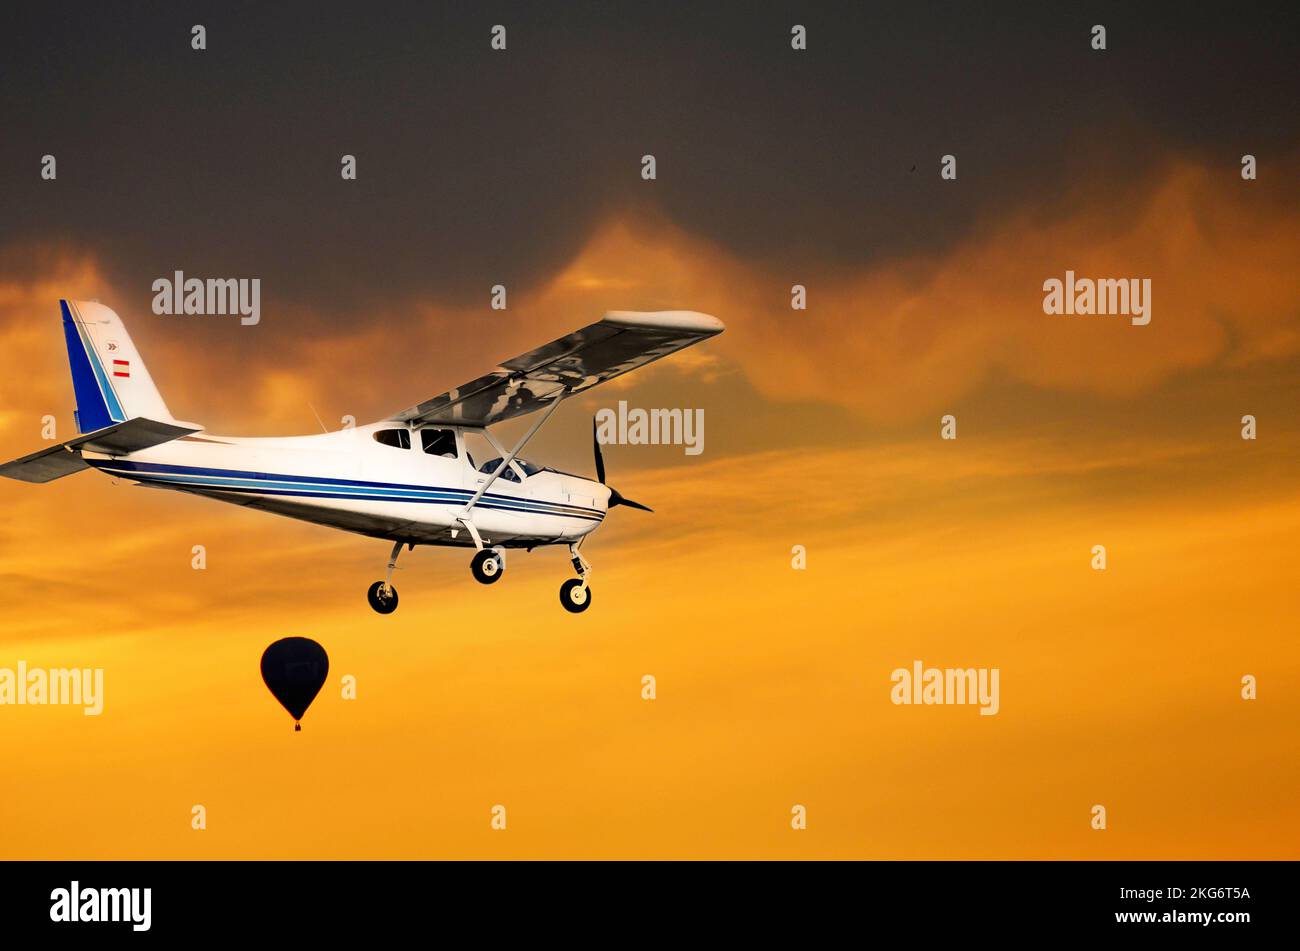 Beautiful shot of a single engine ultralight aircraft flying under the sunset sky Stock Photo